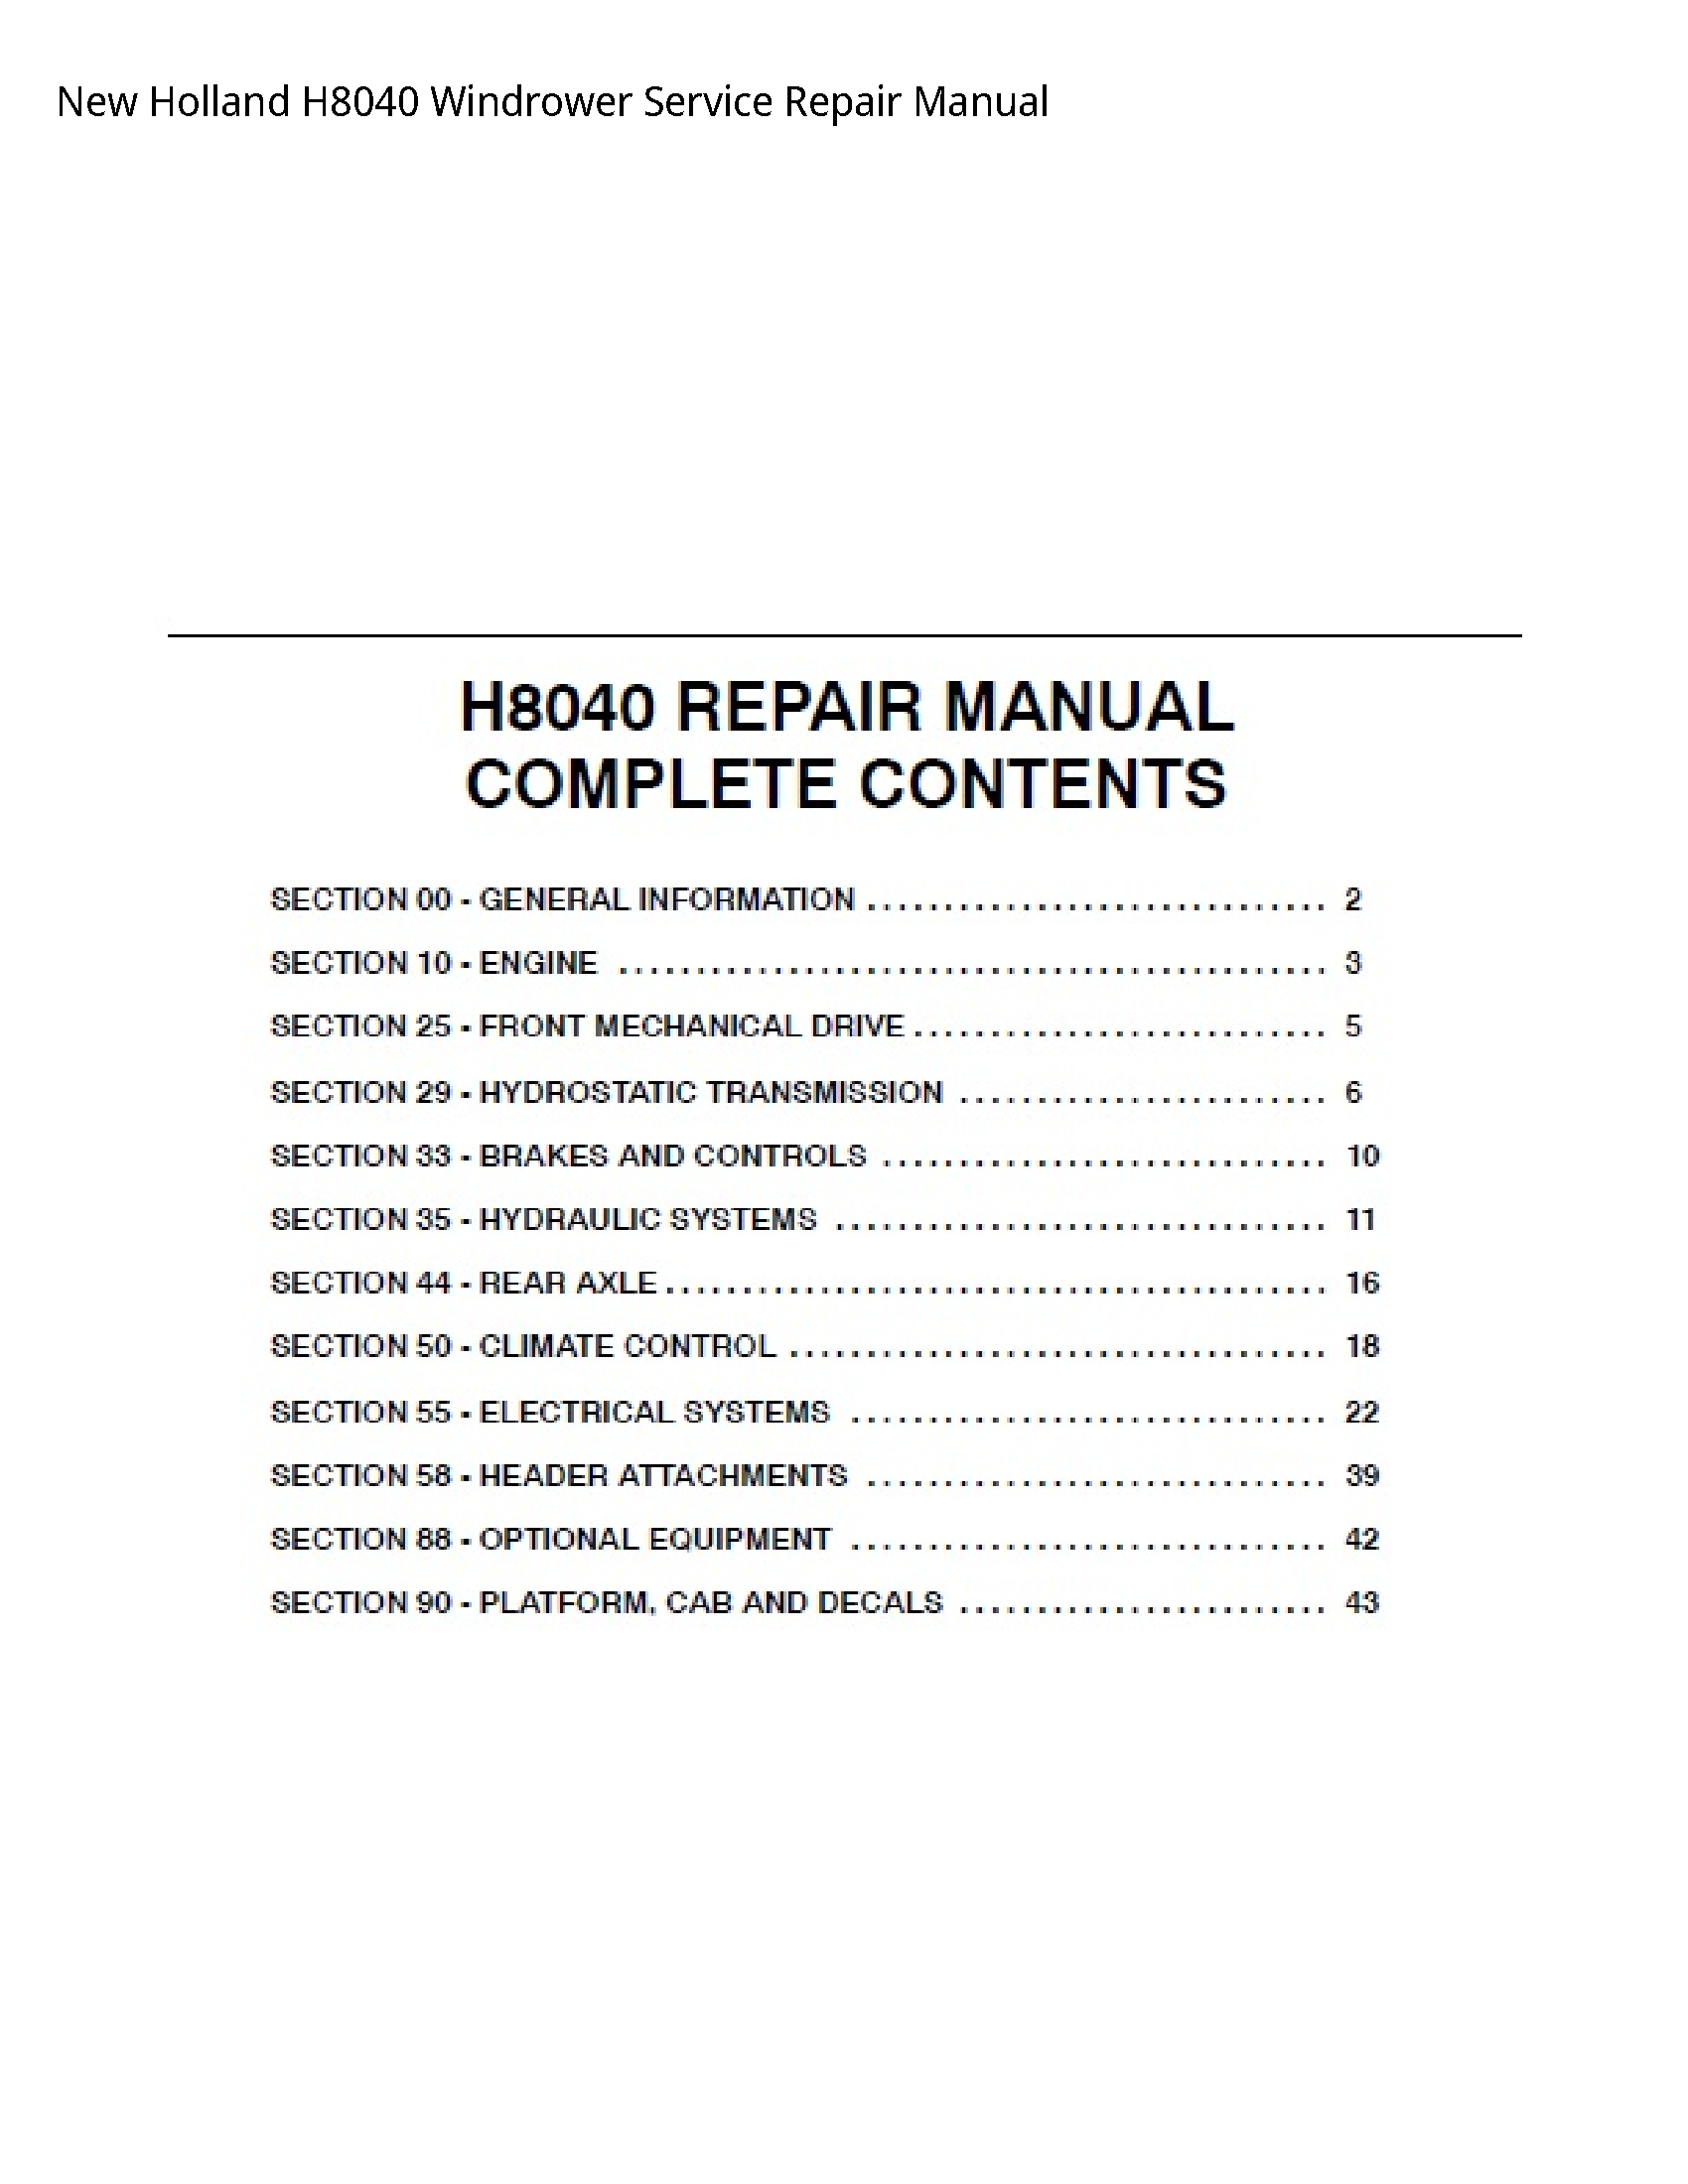 New Holland H8040 Windrower manual